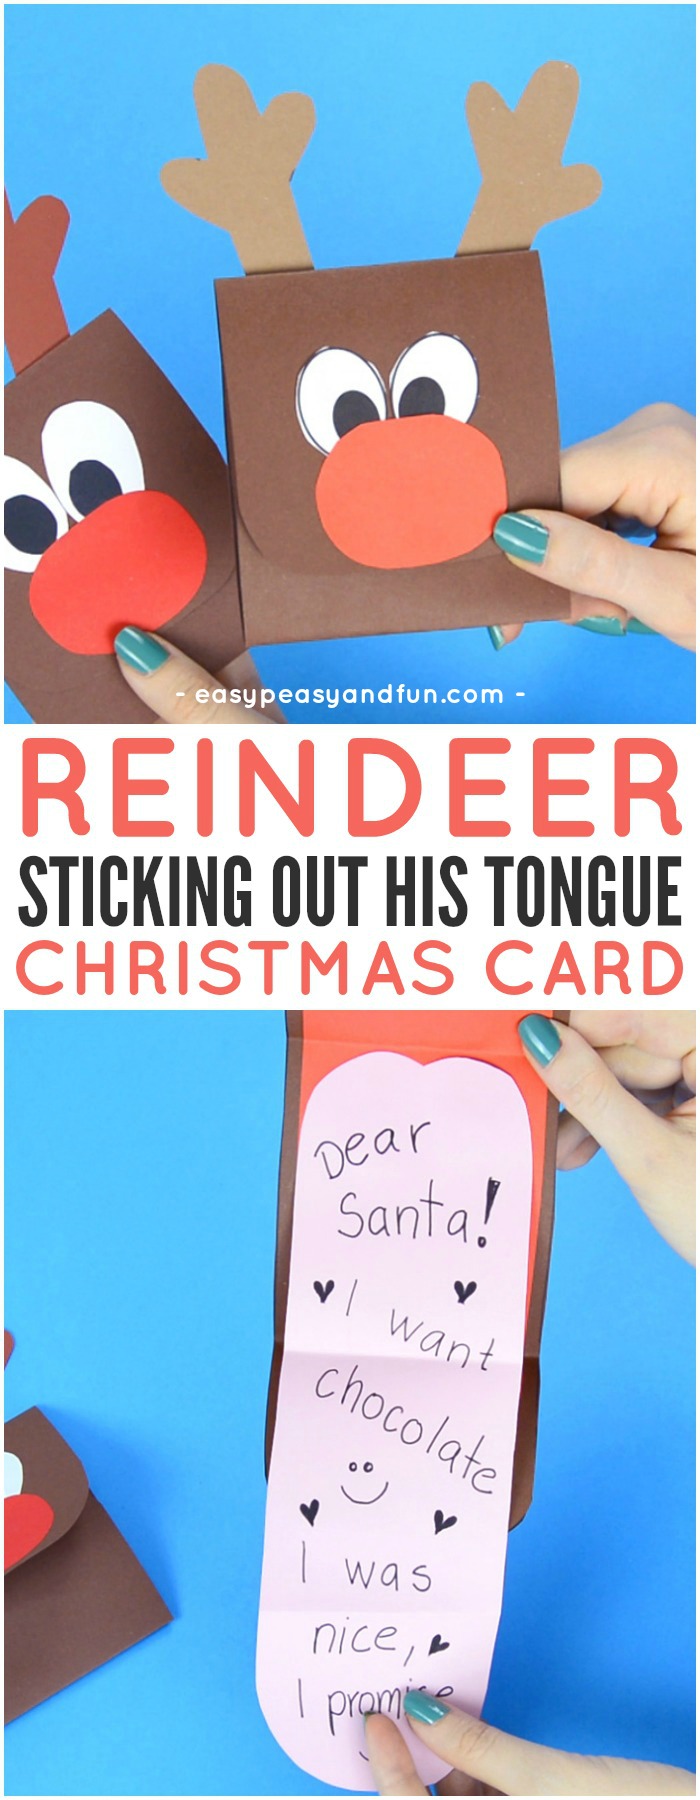 DIY reindeer sticks out tongue to make Christmas card paper model for kids